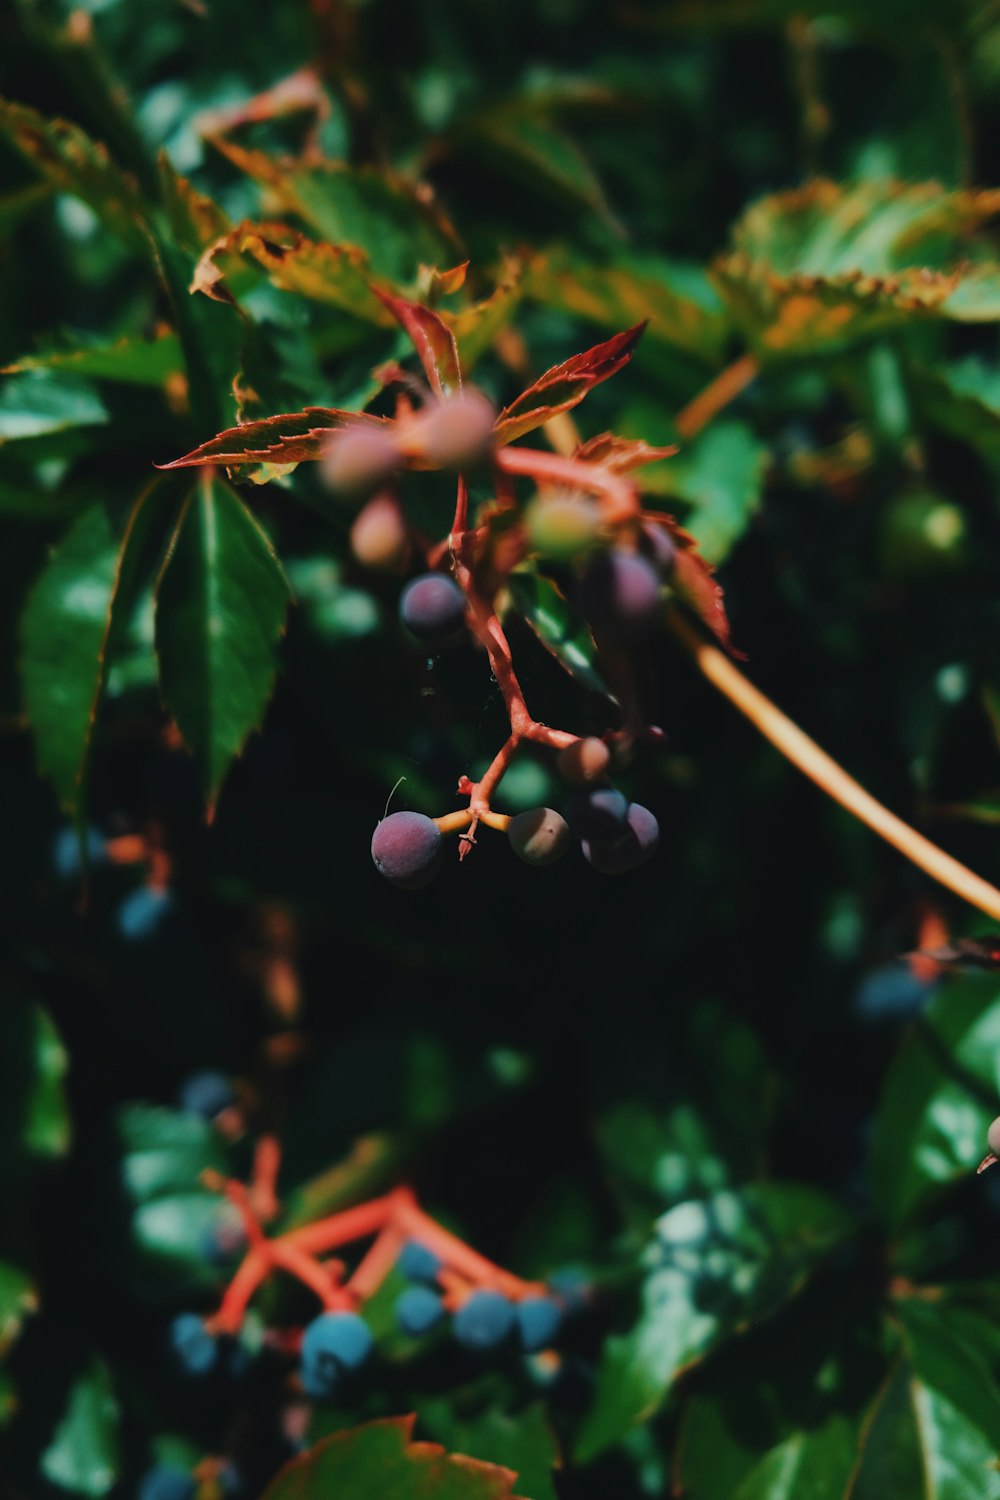 berries are growing on the branches of a tree